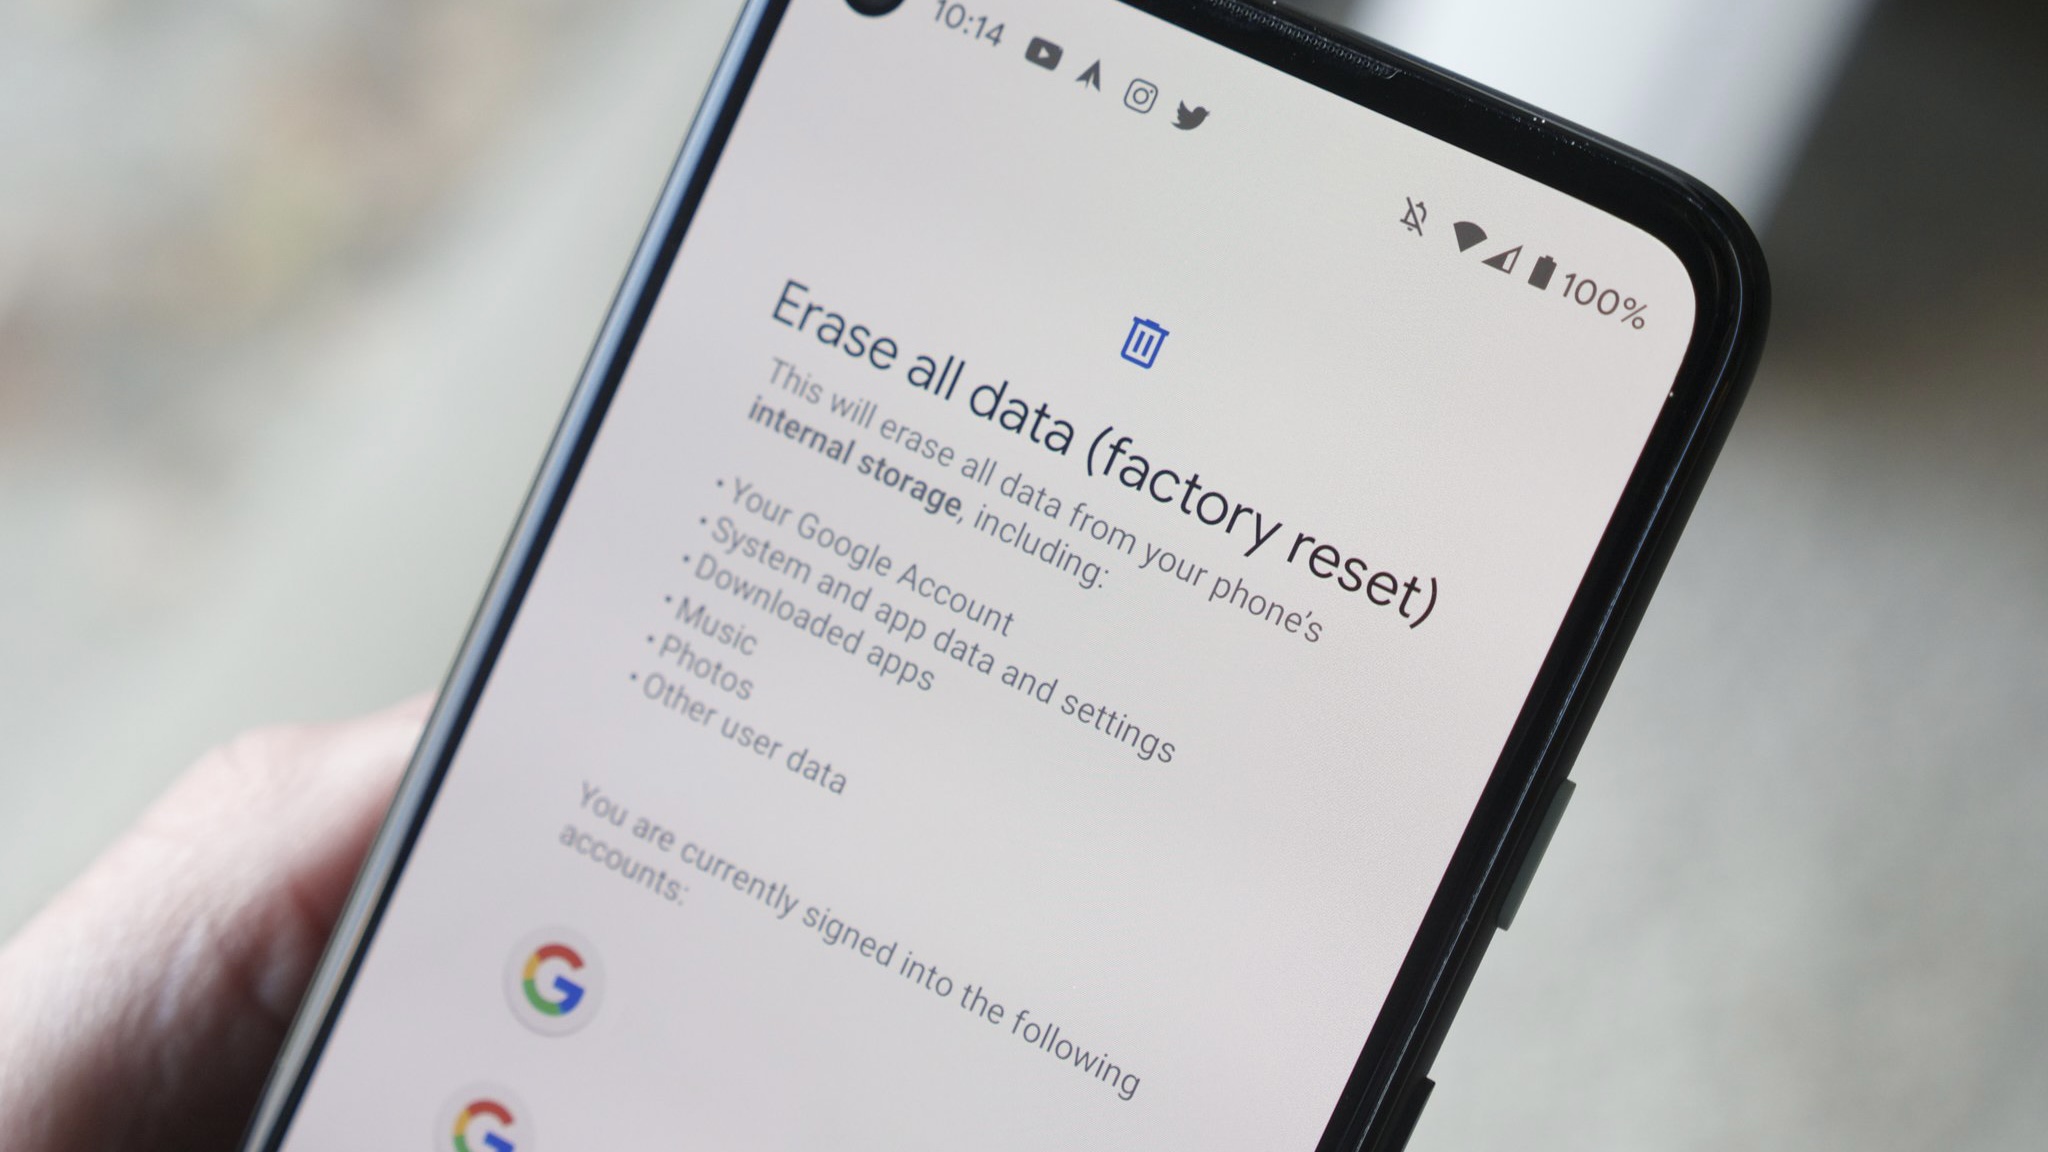 Select "Factory data reset" or a similar option.
Read the information and confirm the reset by tapping on "Reset phone" or "Erase everything".